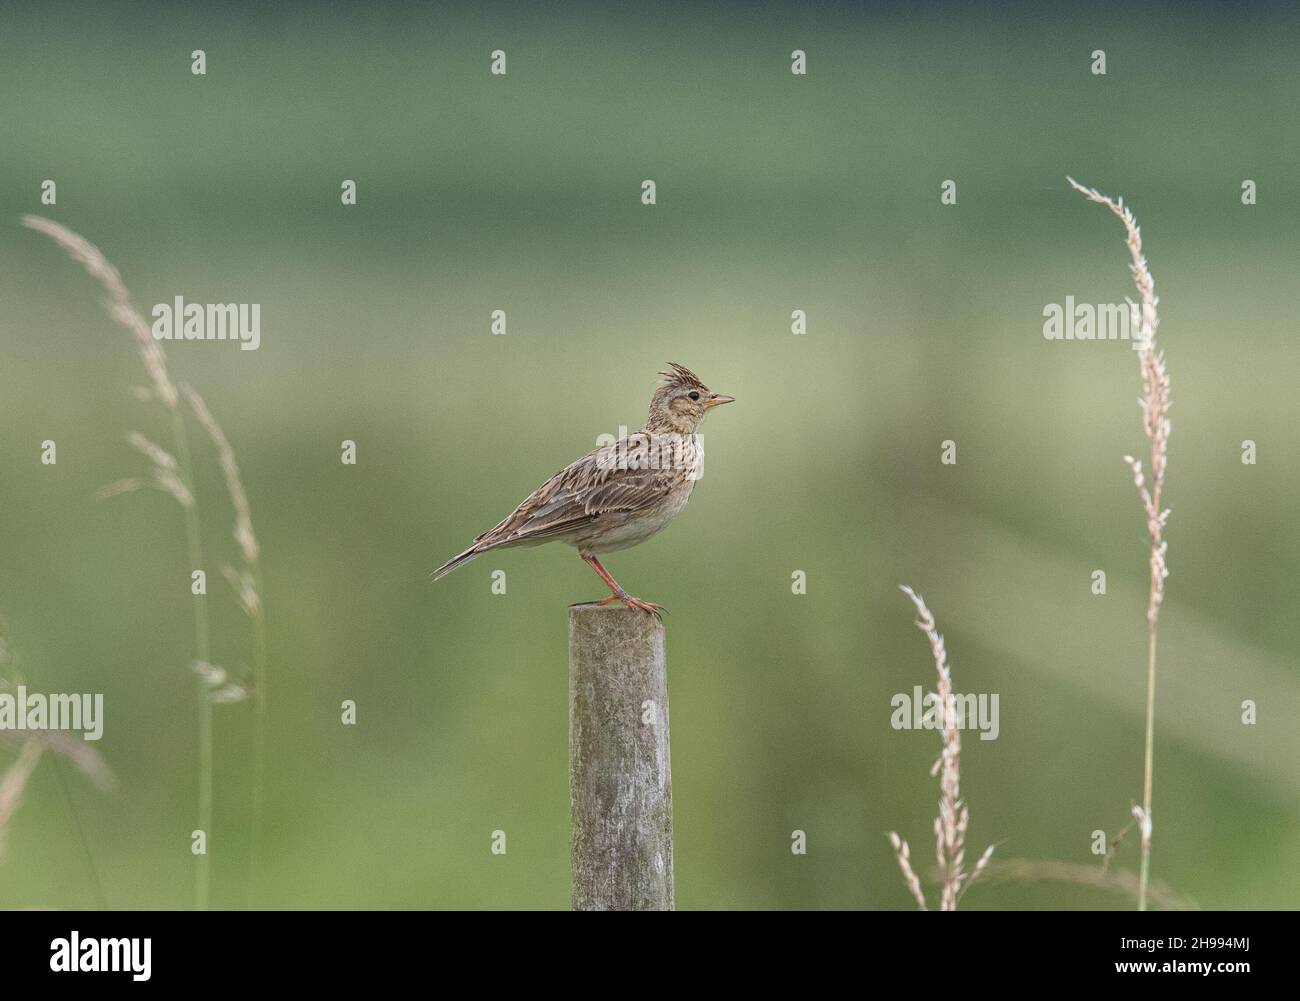 A bright eyed Skylark sitting with its crest up on a post  against a clear background framed by grasses on a Suffolk farm.  UK. Stock Photo